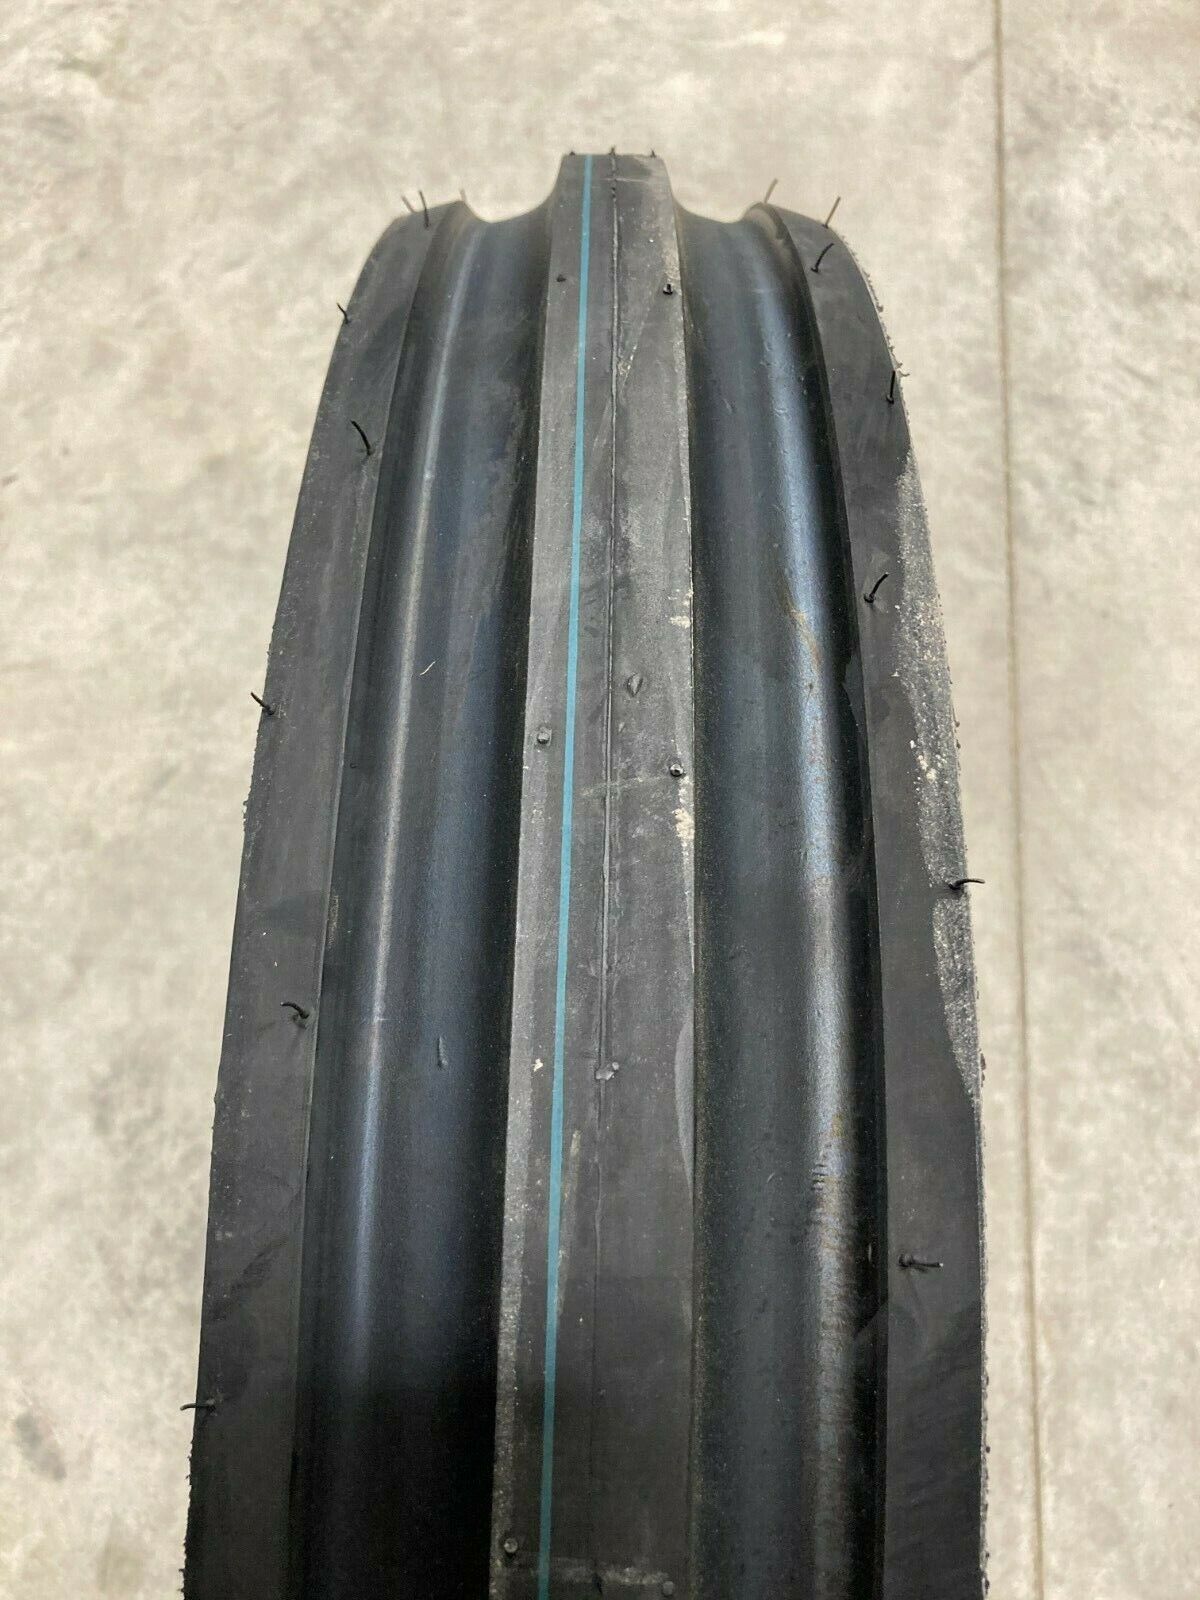 TWO New Tires 6.00 16 Deestone F-2 3 rib 6ply TT 6.00x16 Tractor Front